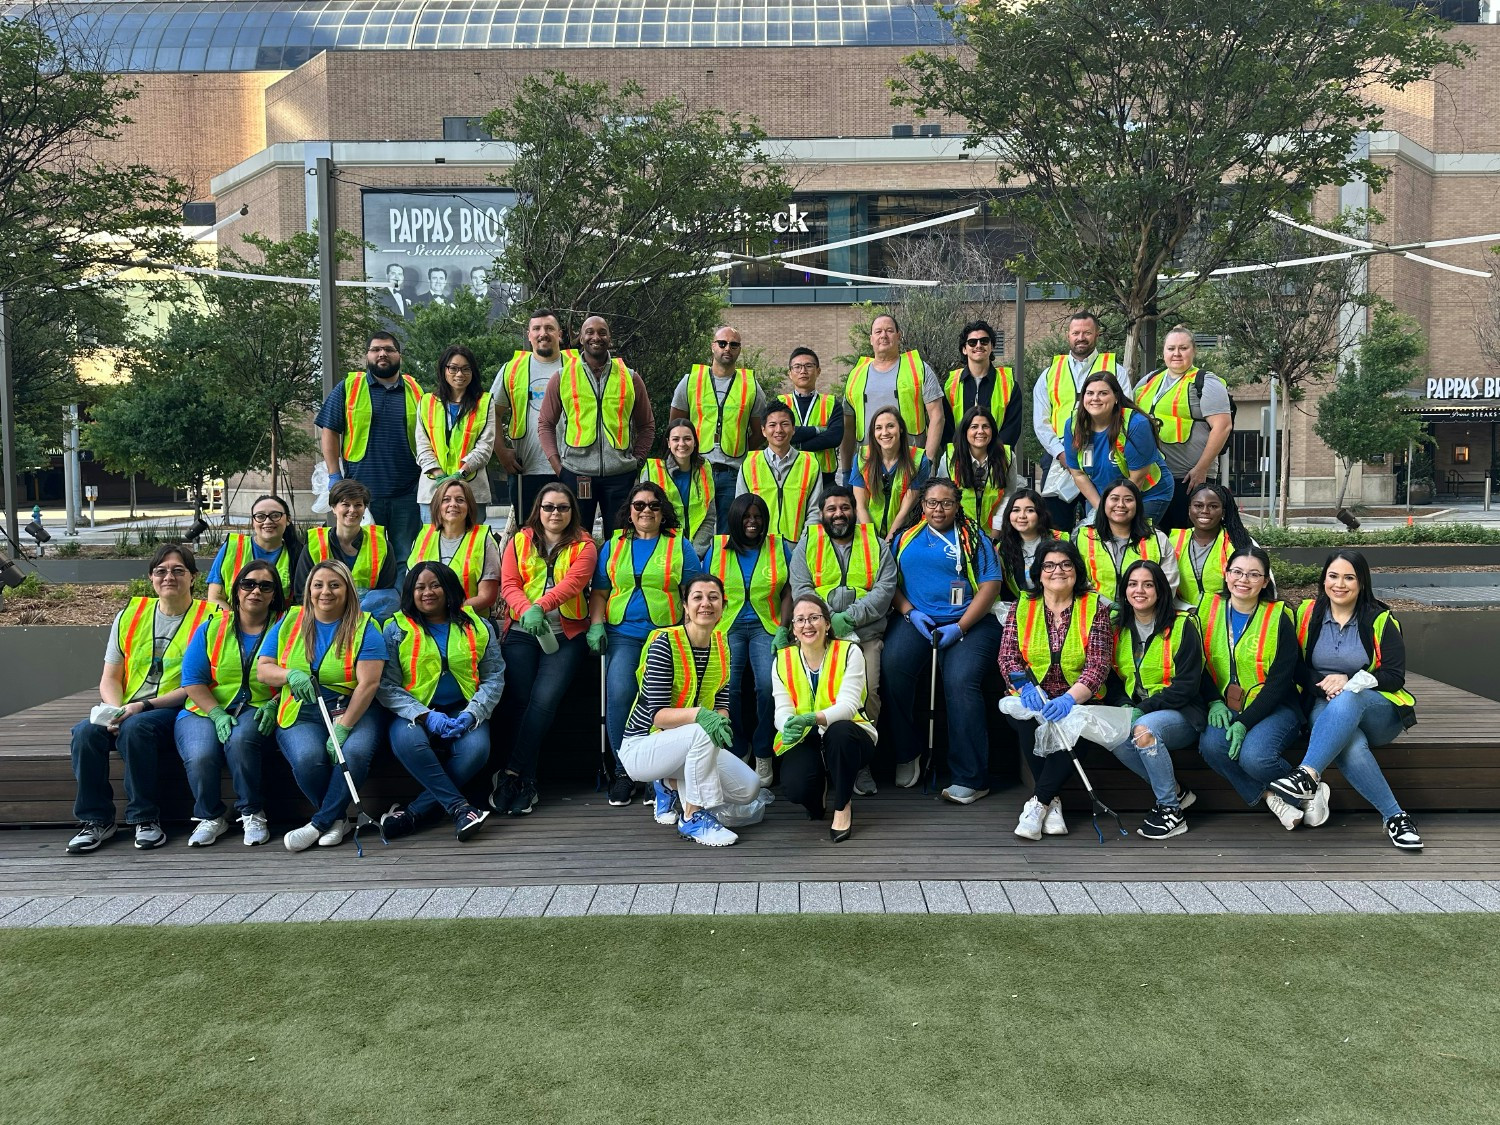 The Sooner Inc. team celebrates Earth Day by cleaning up the city making a positive impact in the environment.